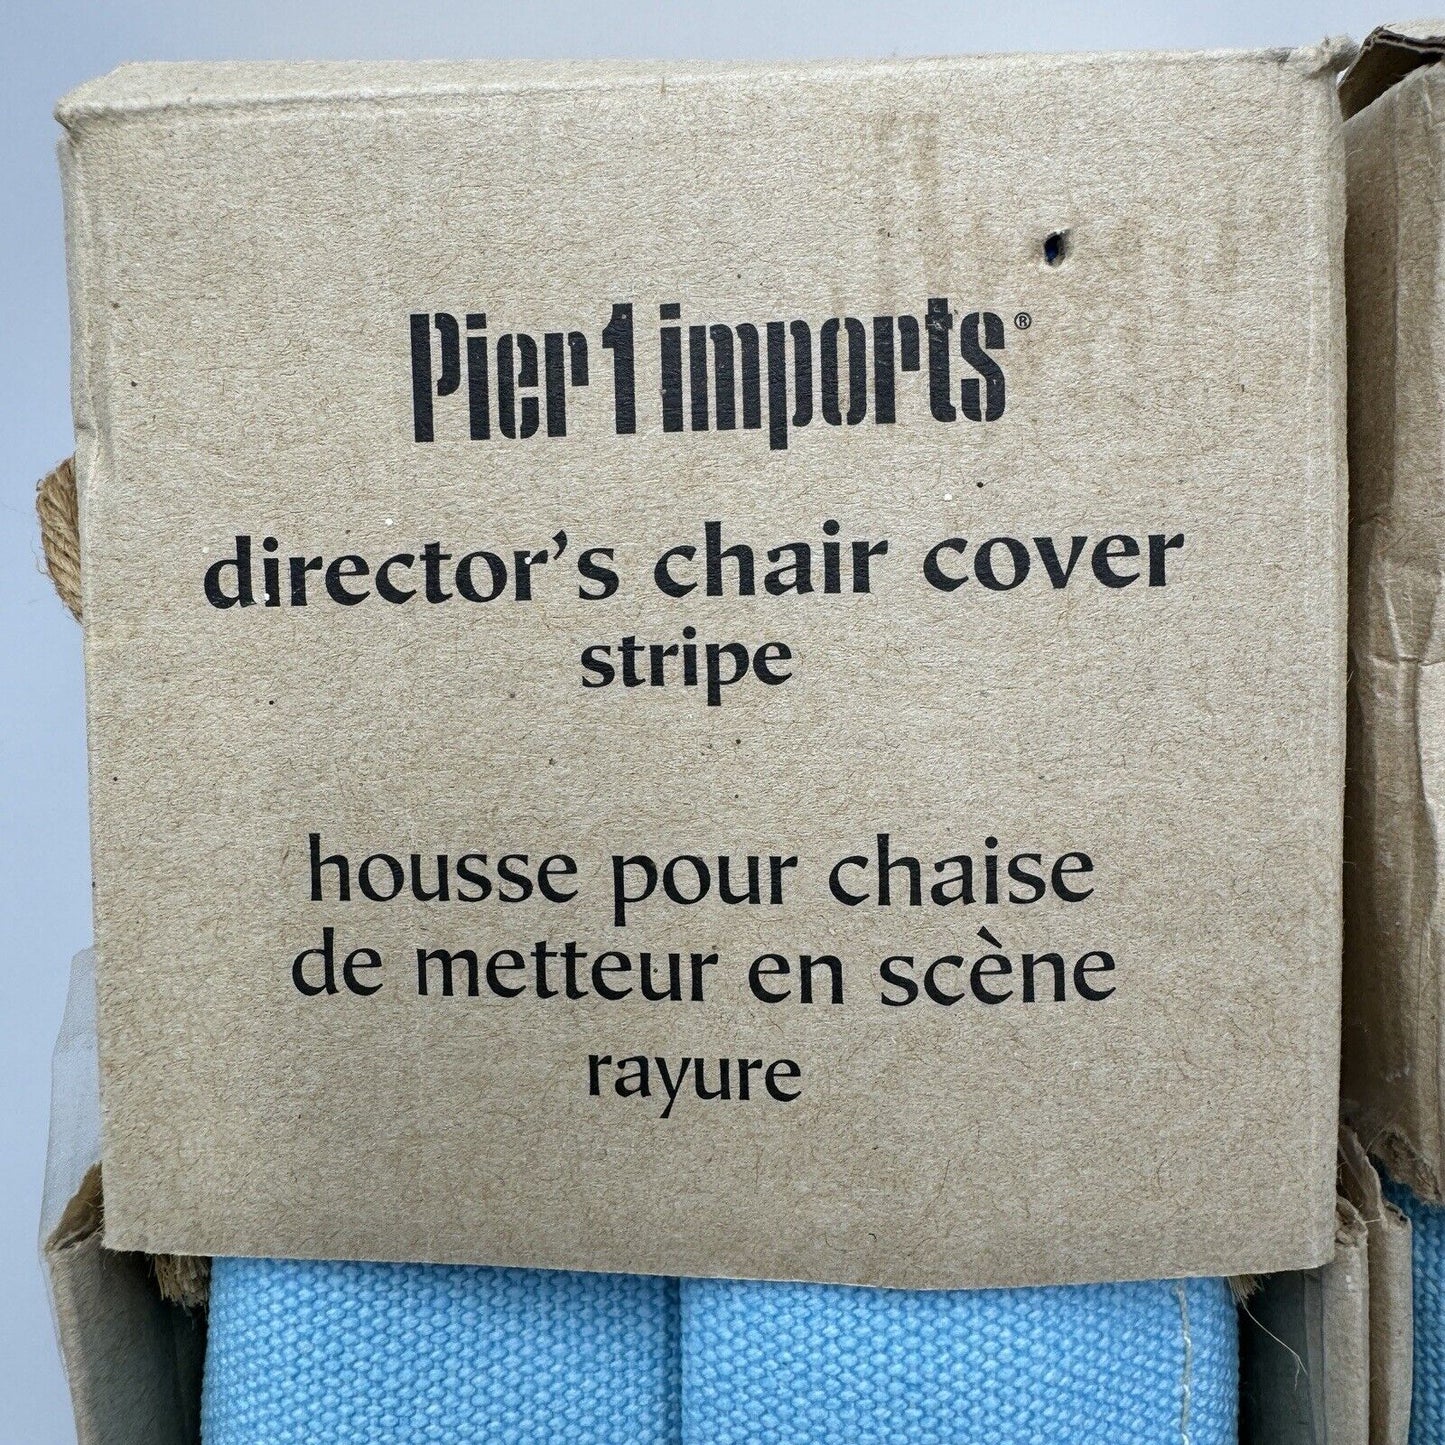 Pier 1 Imports Striped Director's Chair Cover